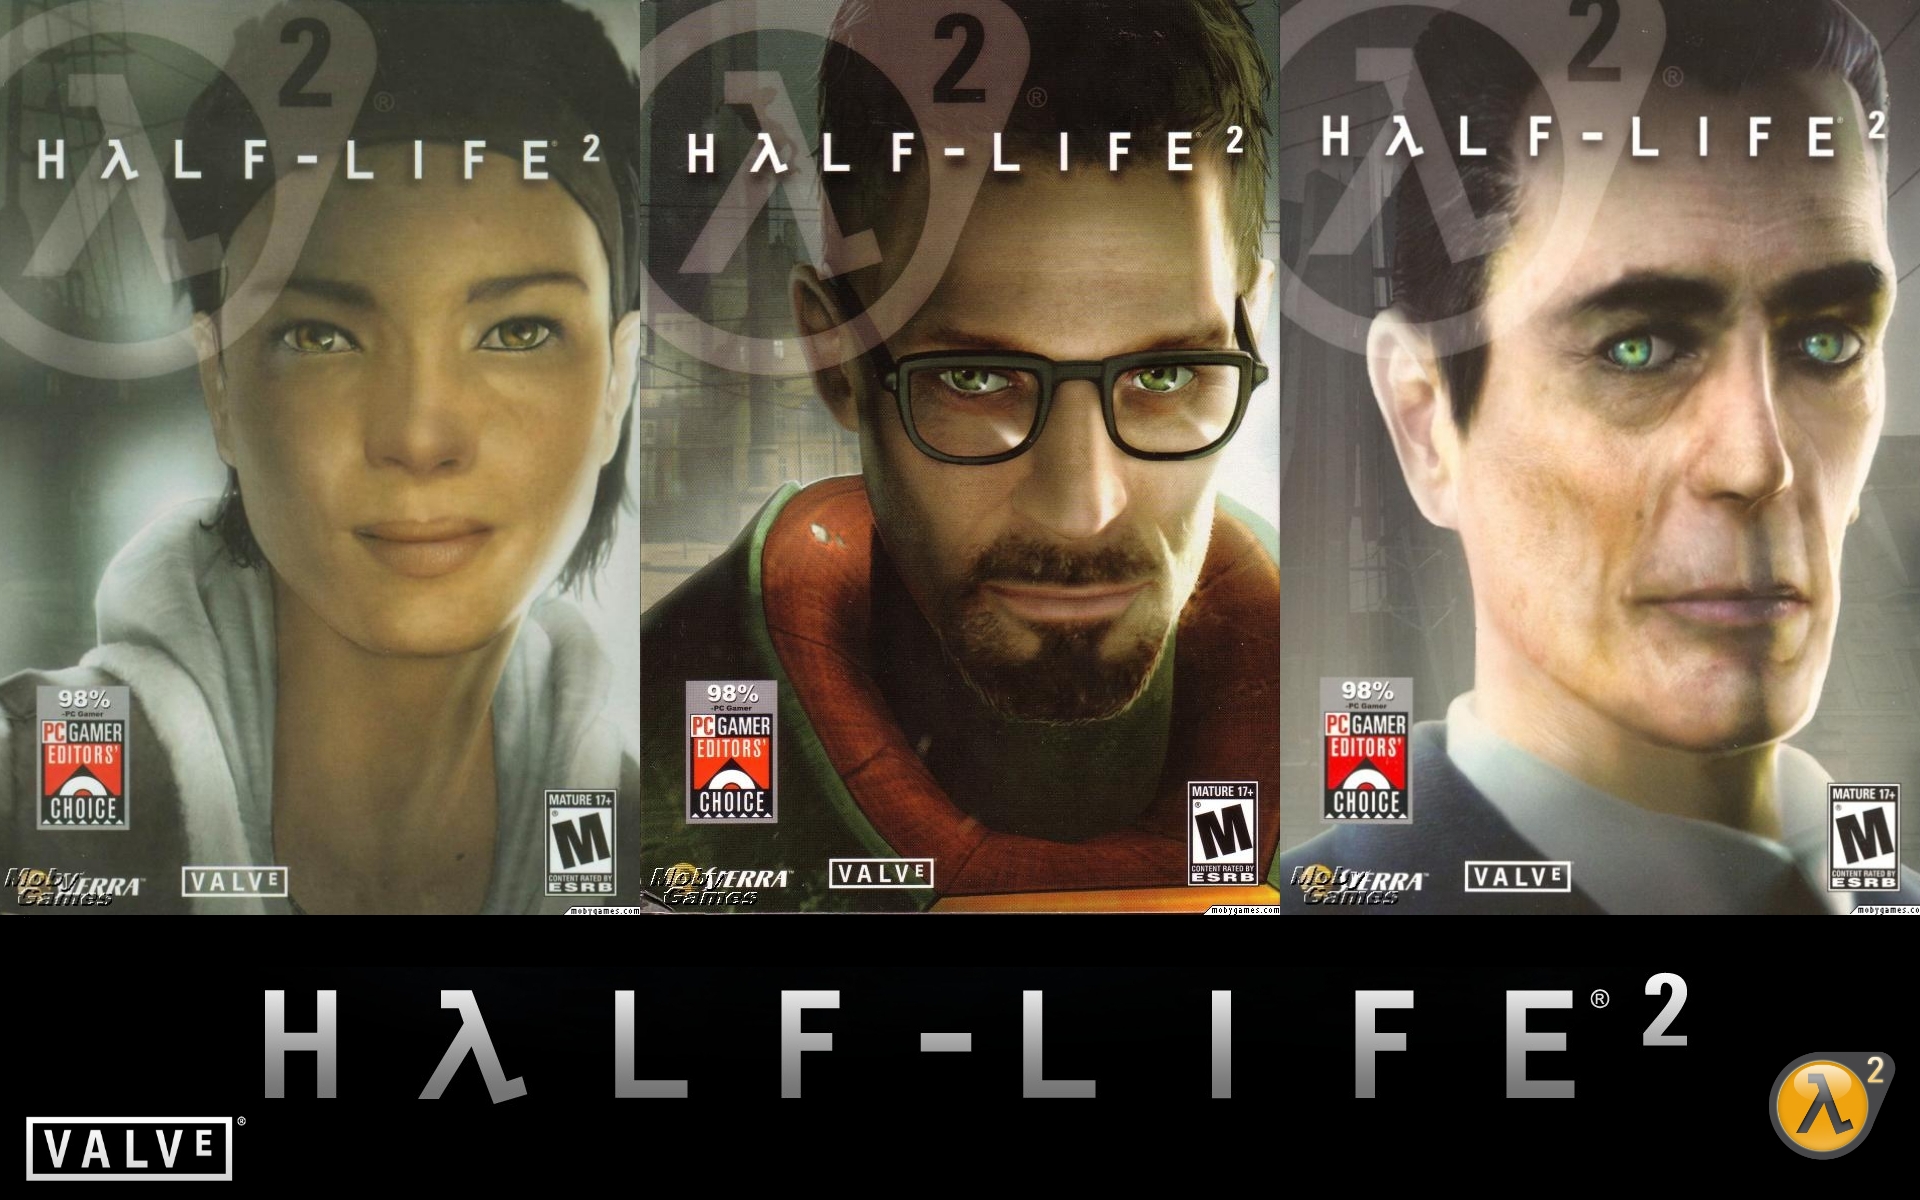 A powerful trio from the Half-Life gaming universe: Alyx Vance, Gordon Freeman, and G-Man.